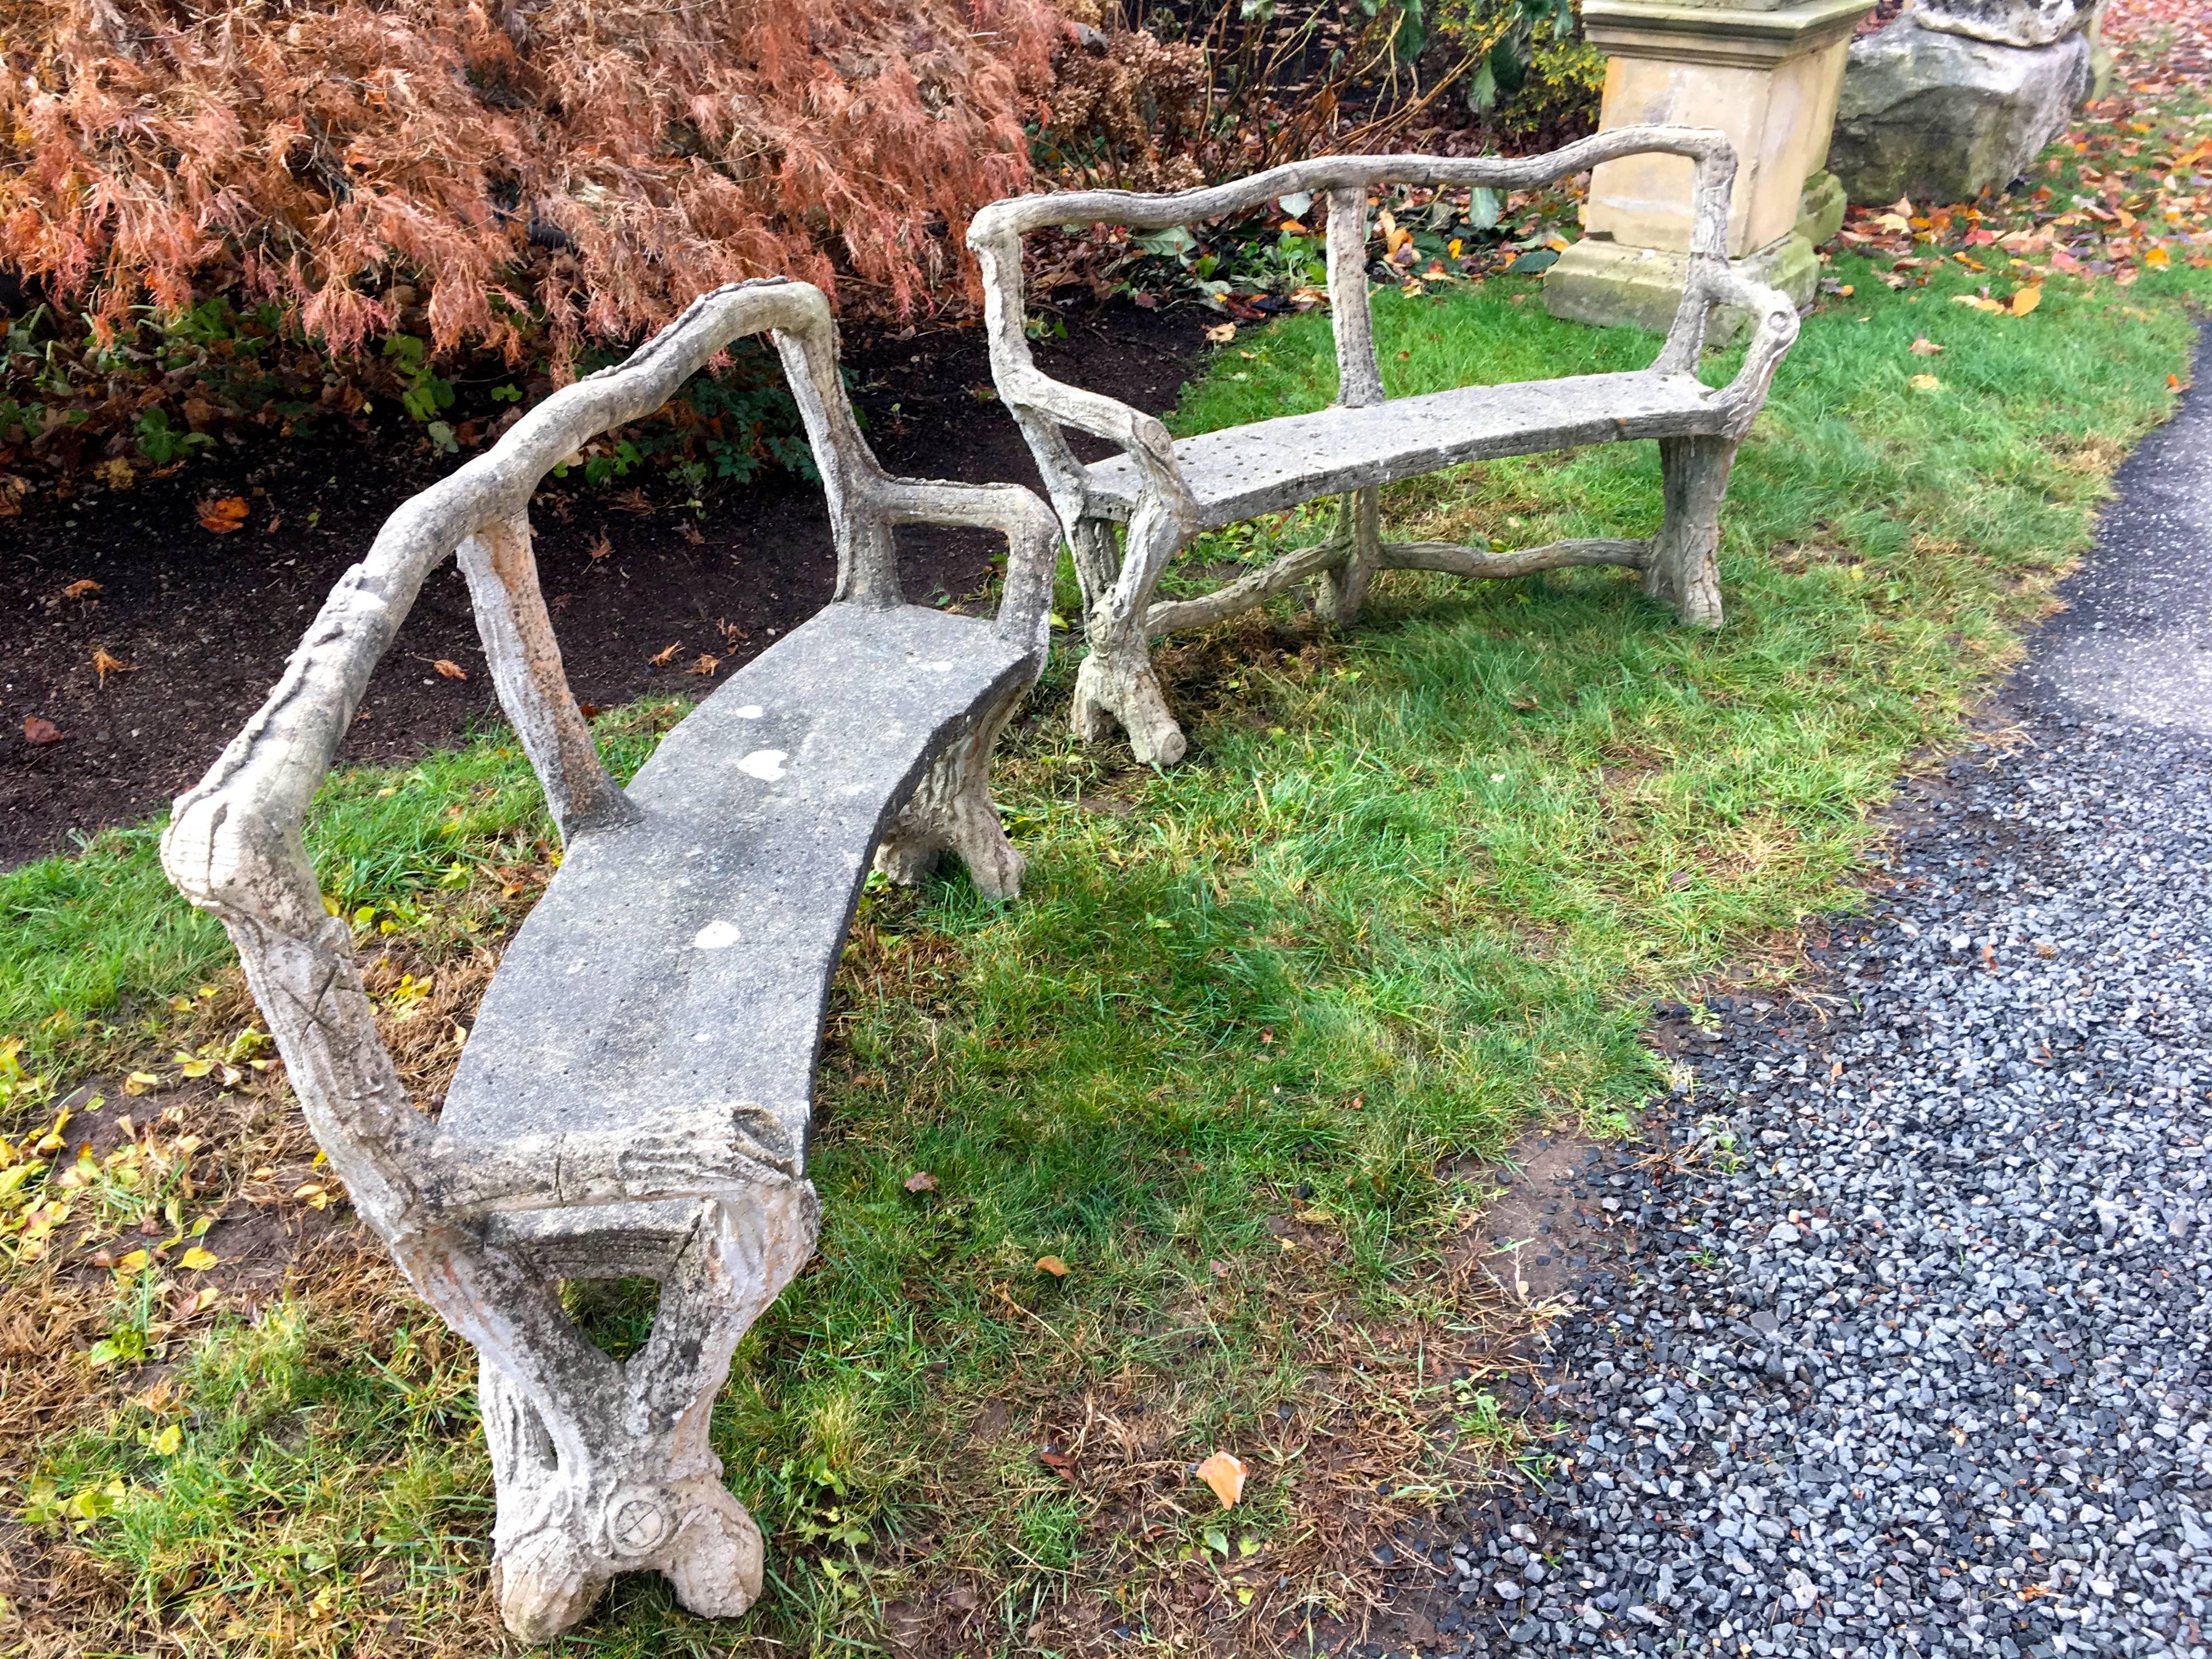 A very rare find, this pair of classical curved faux bois benches has a beautiful weathered surface with lichen and bits of moss. In perfect condition, they are so realistic that they have faux 